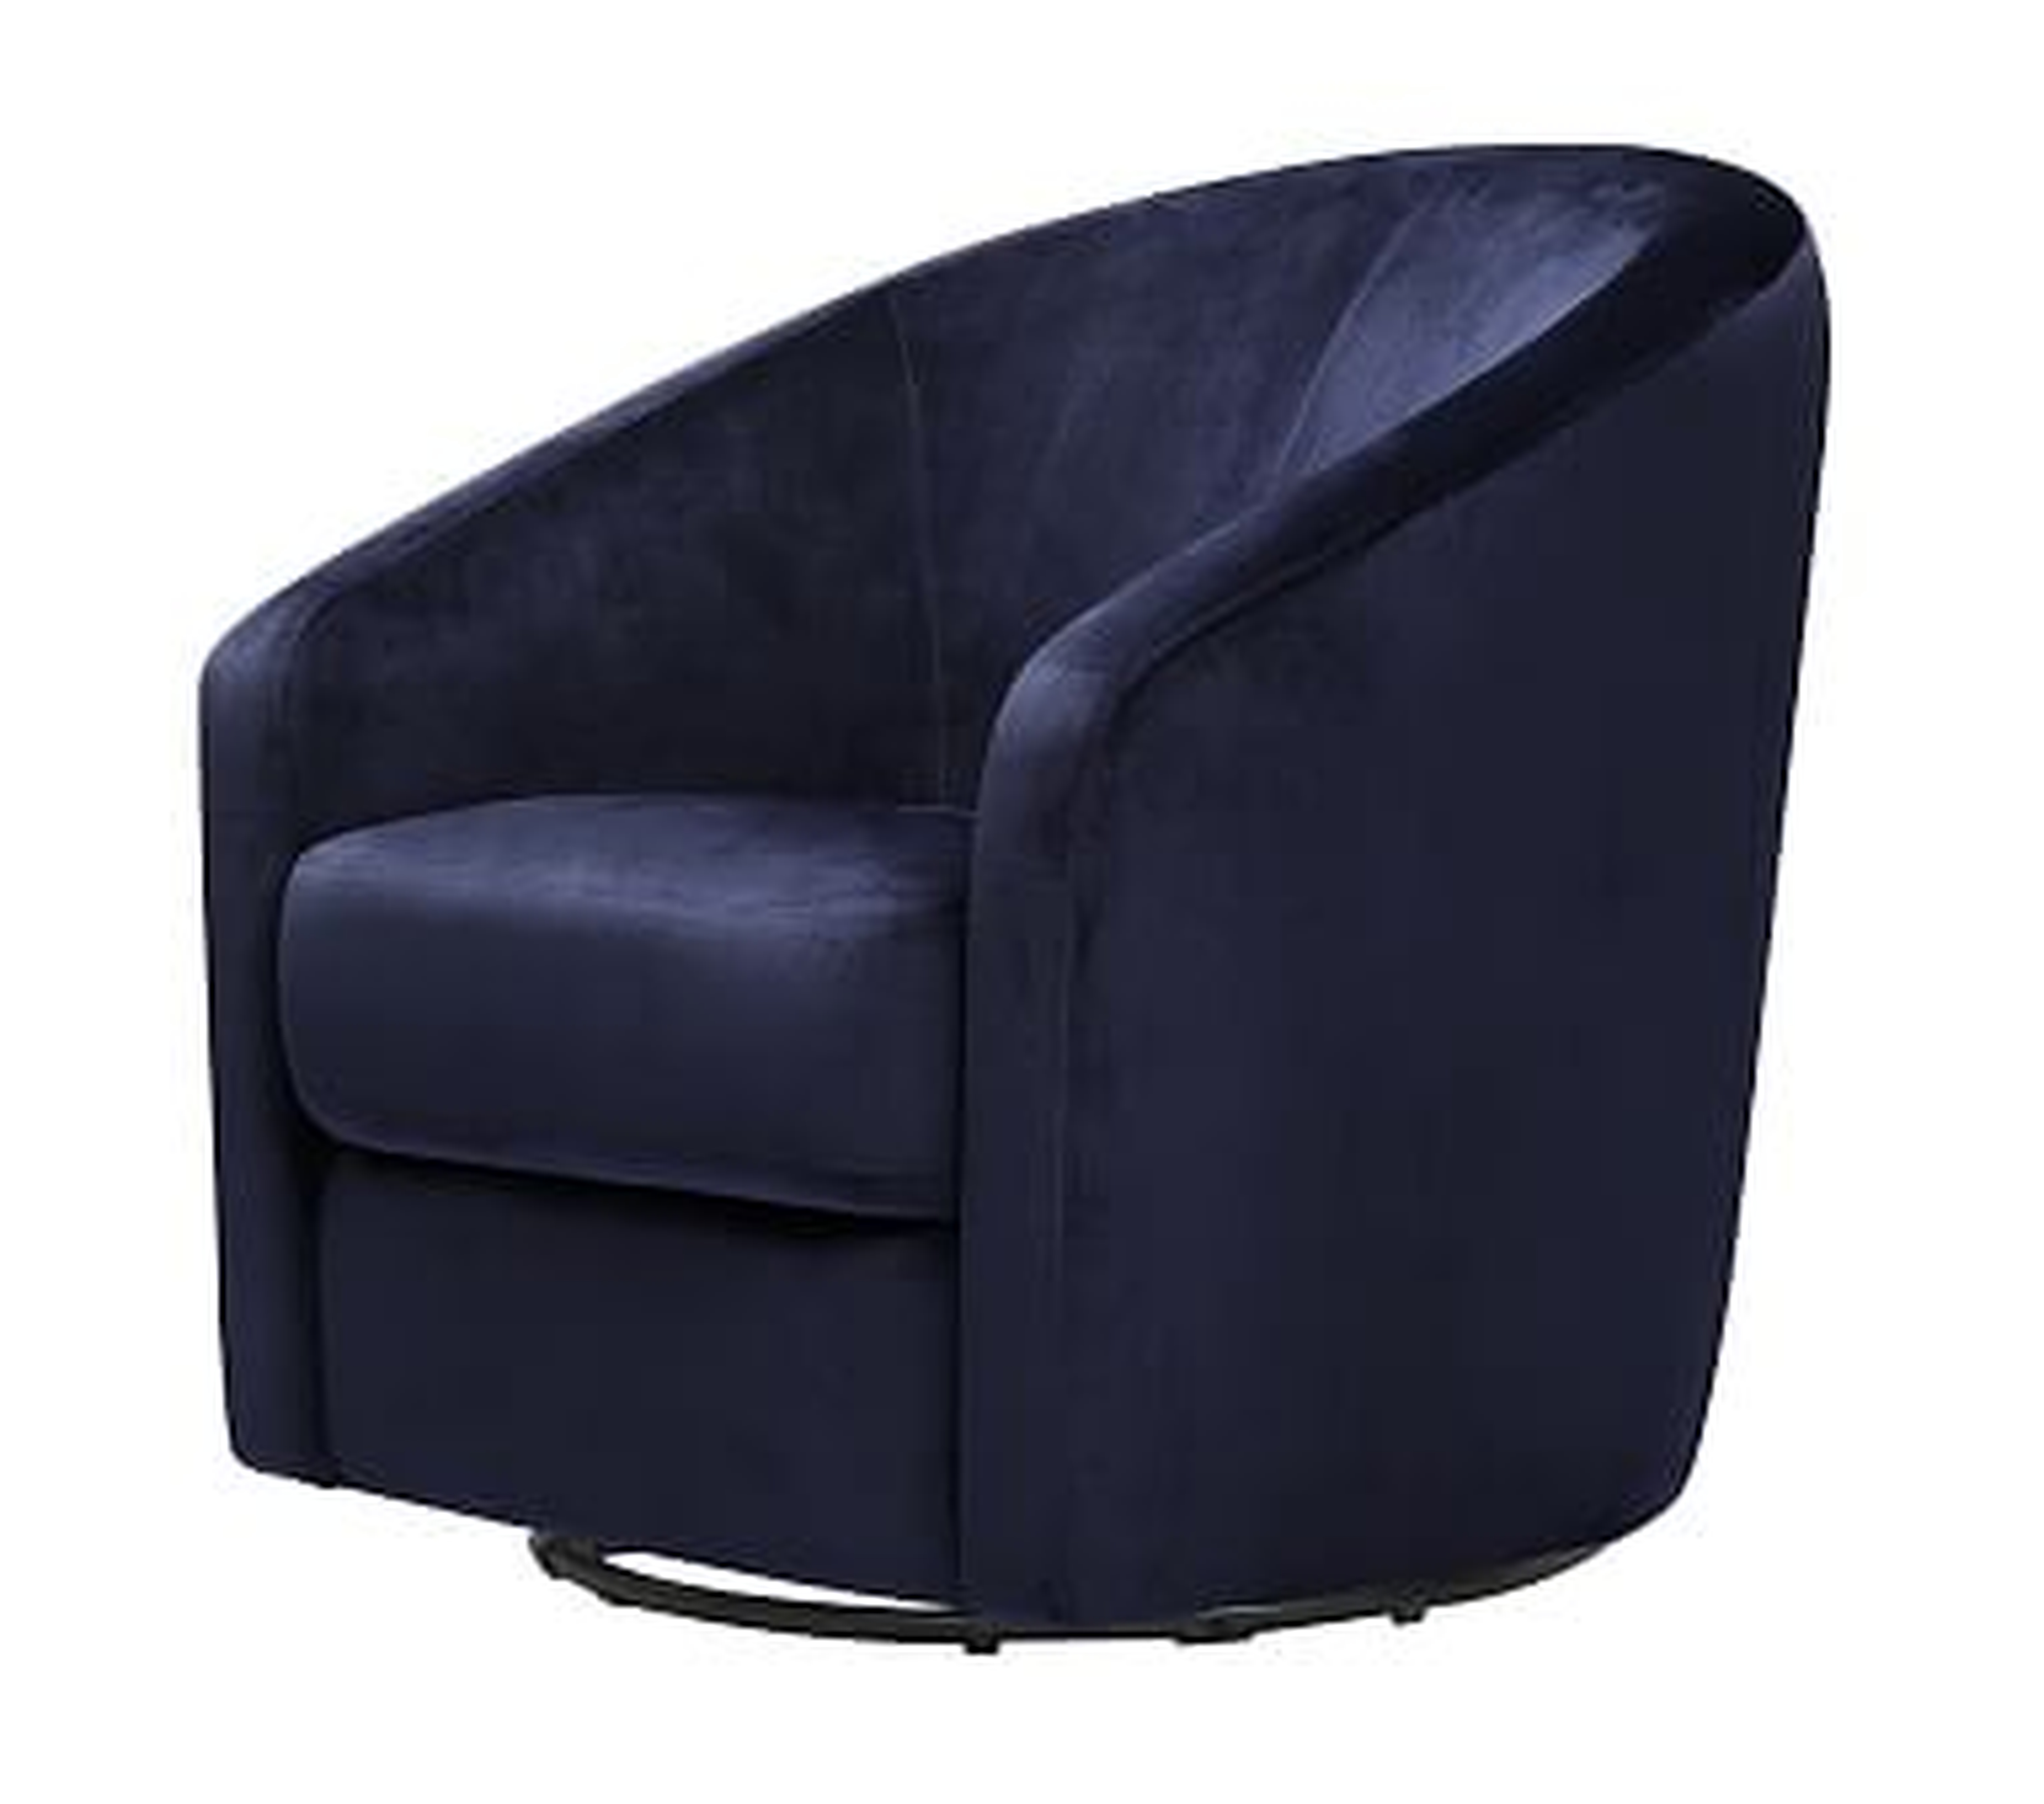 Babyletto Madison Swivel Glider, Microsuede Navy - Pottery Barn Kids